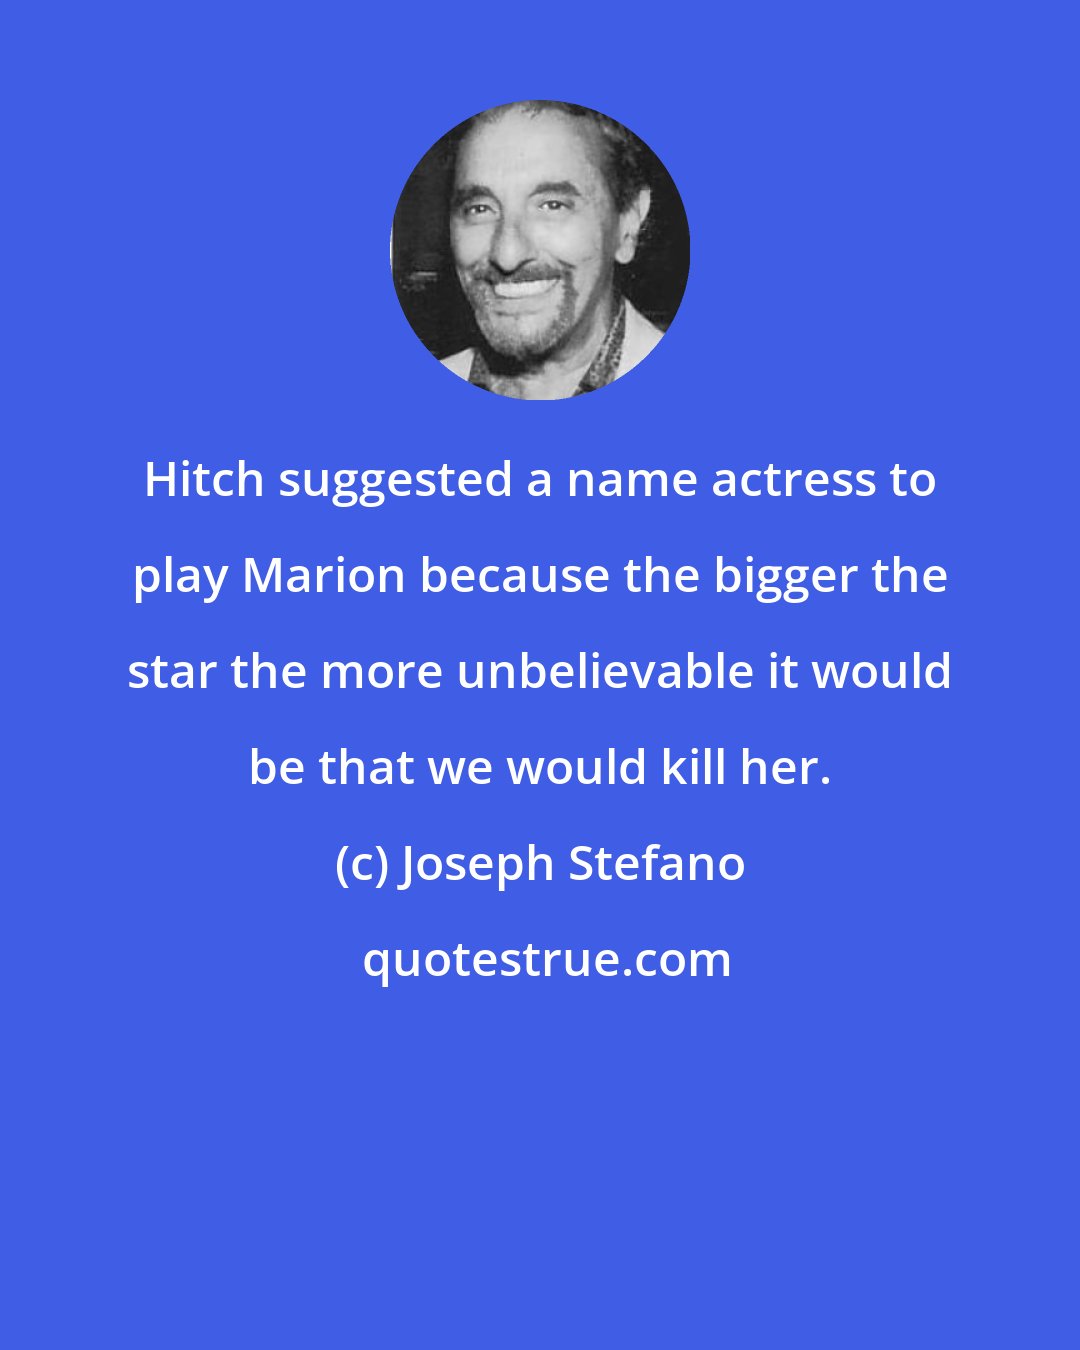 Joseph Stefano: Hitch suggested a name actress to play Marion because the bigger the star the more unbelievable it would be that we would kill her.